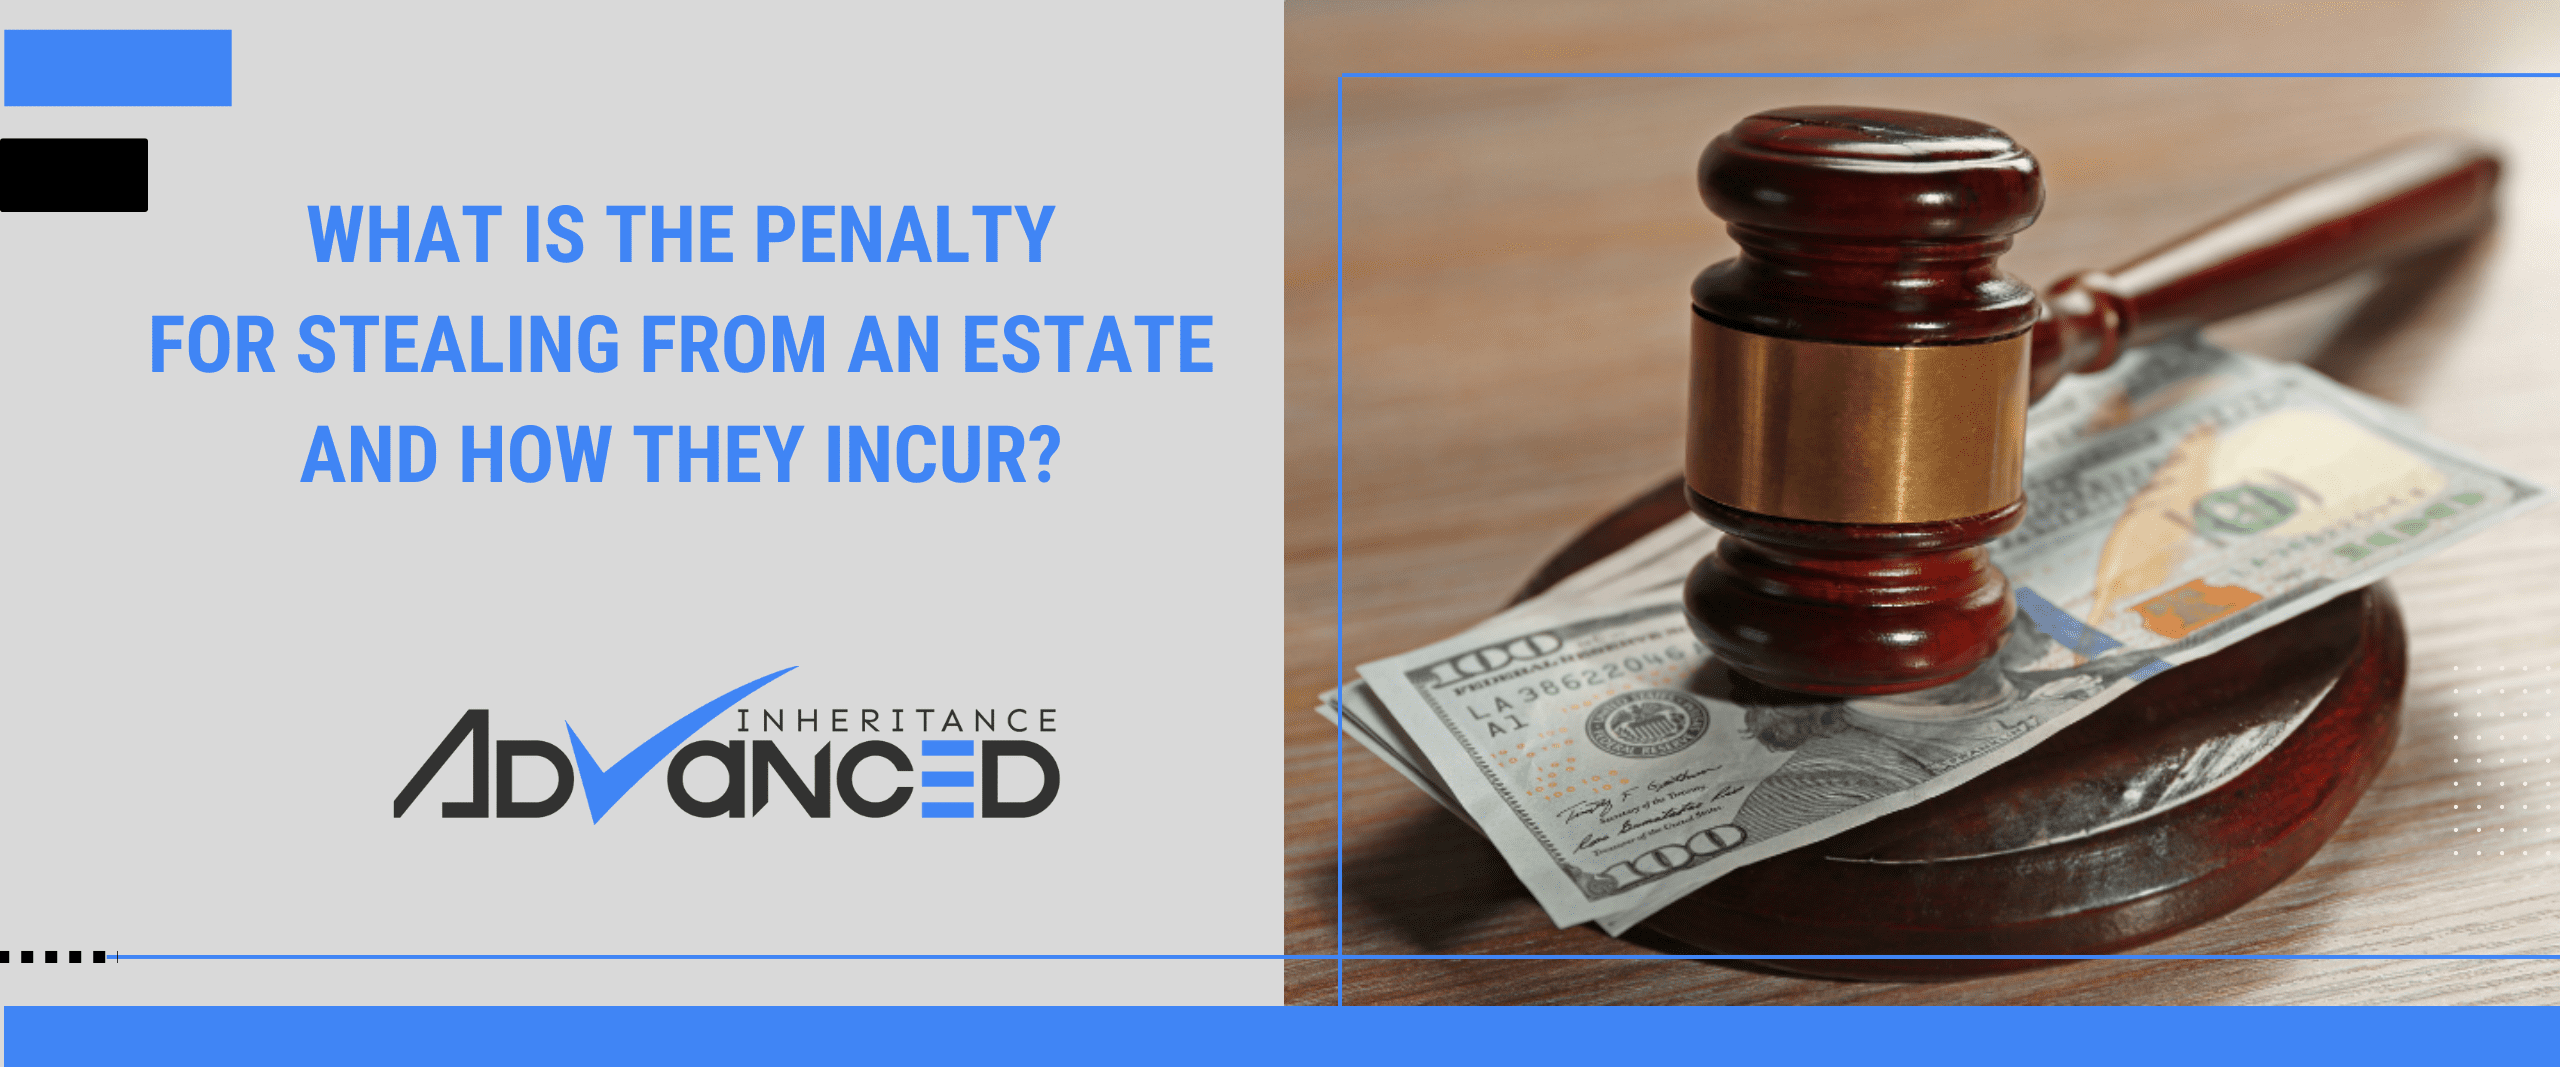 What Is The Penalty For Stealing From An Estate And How They Incur